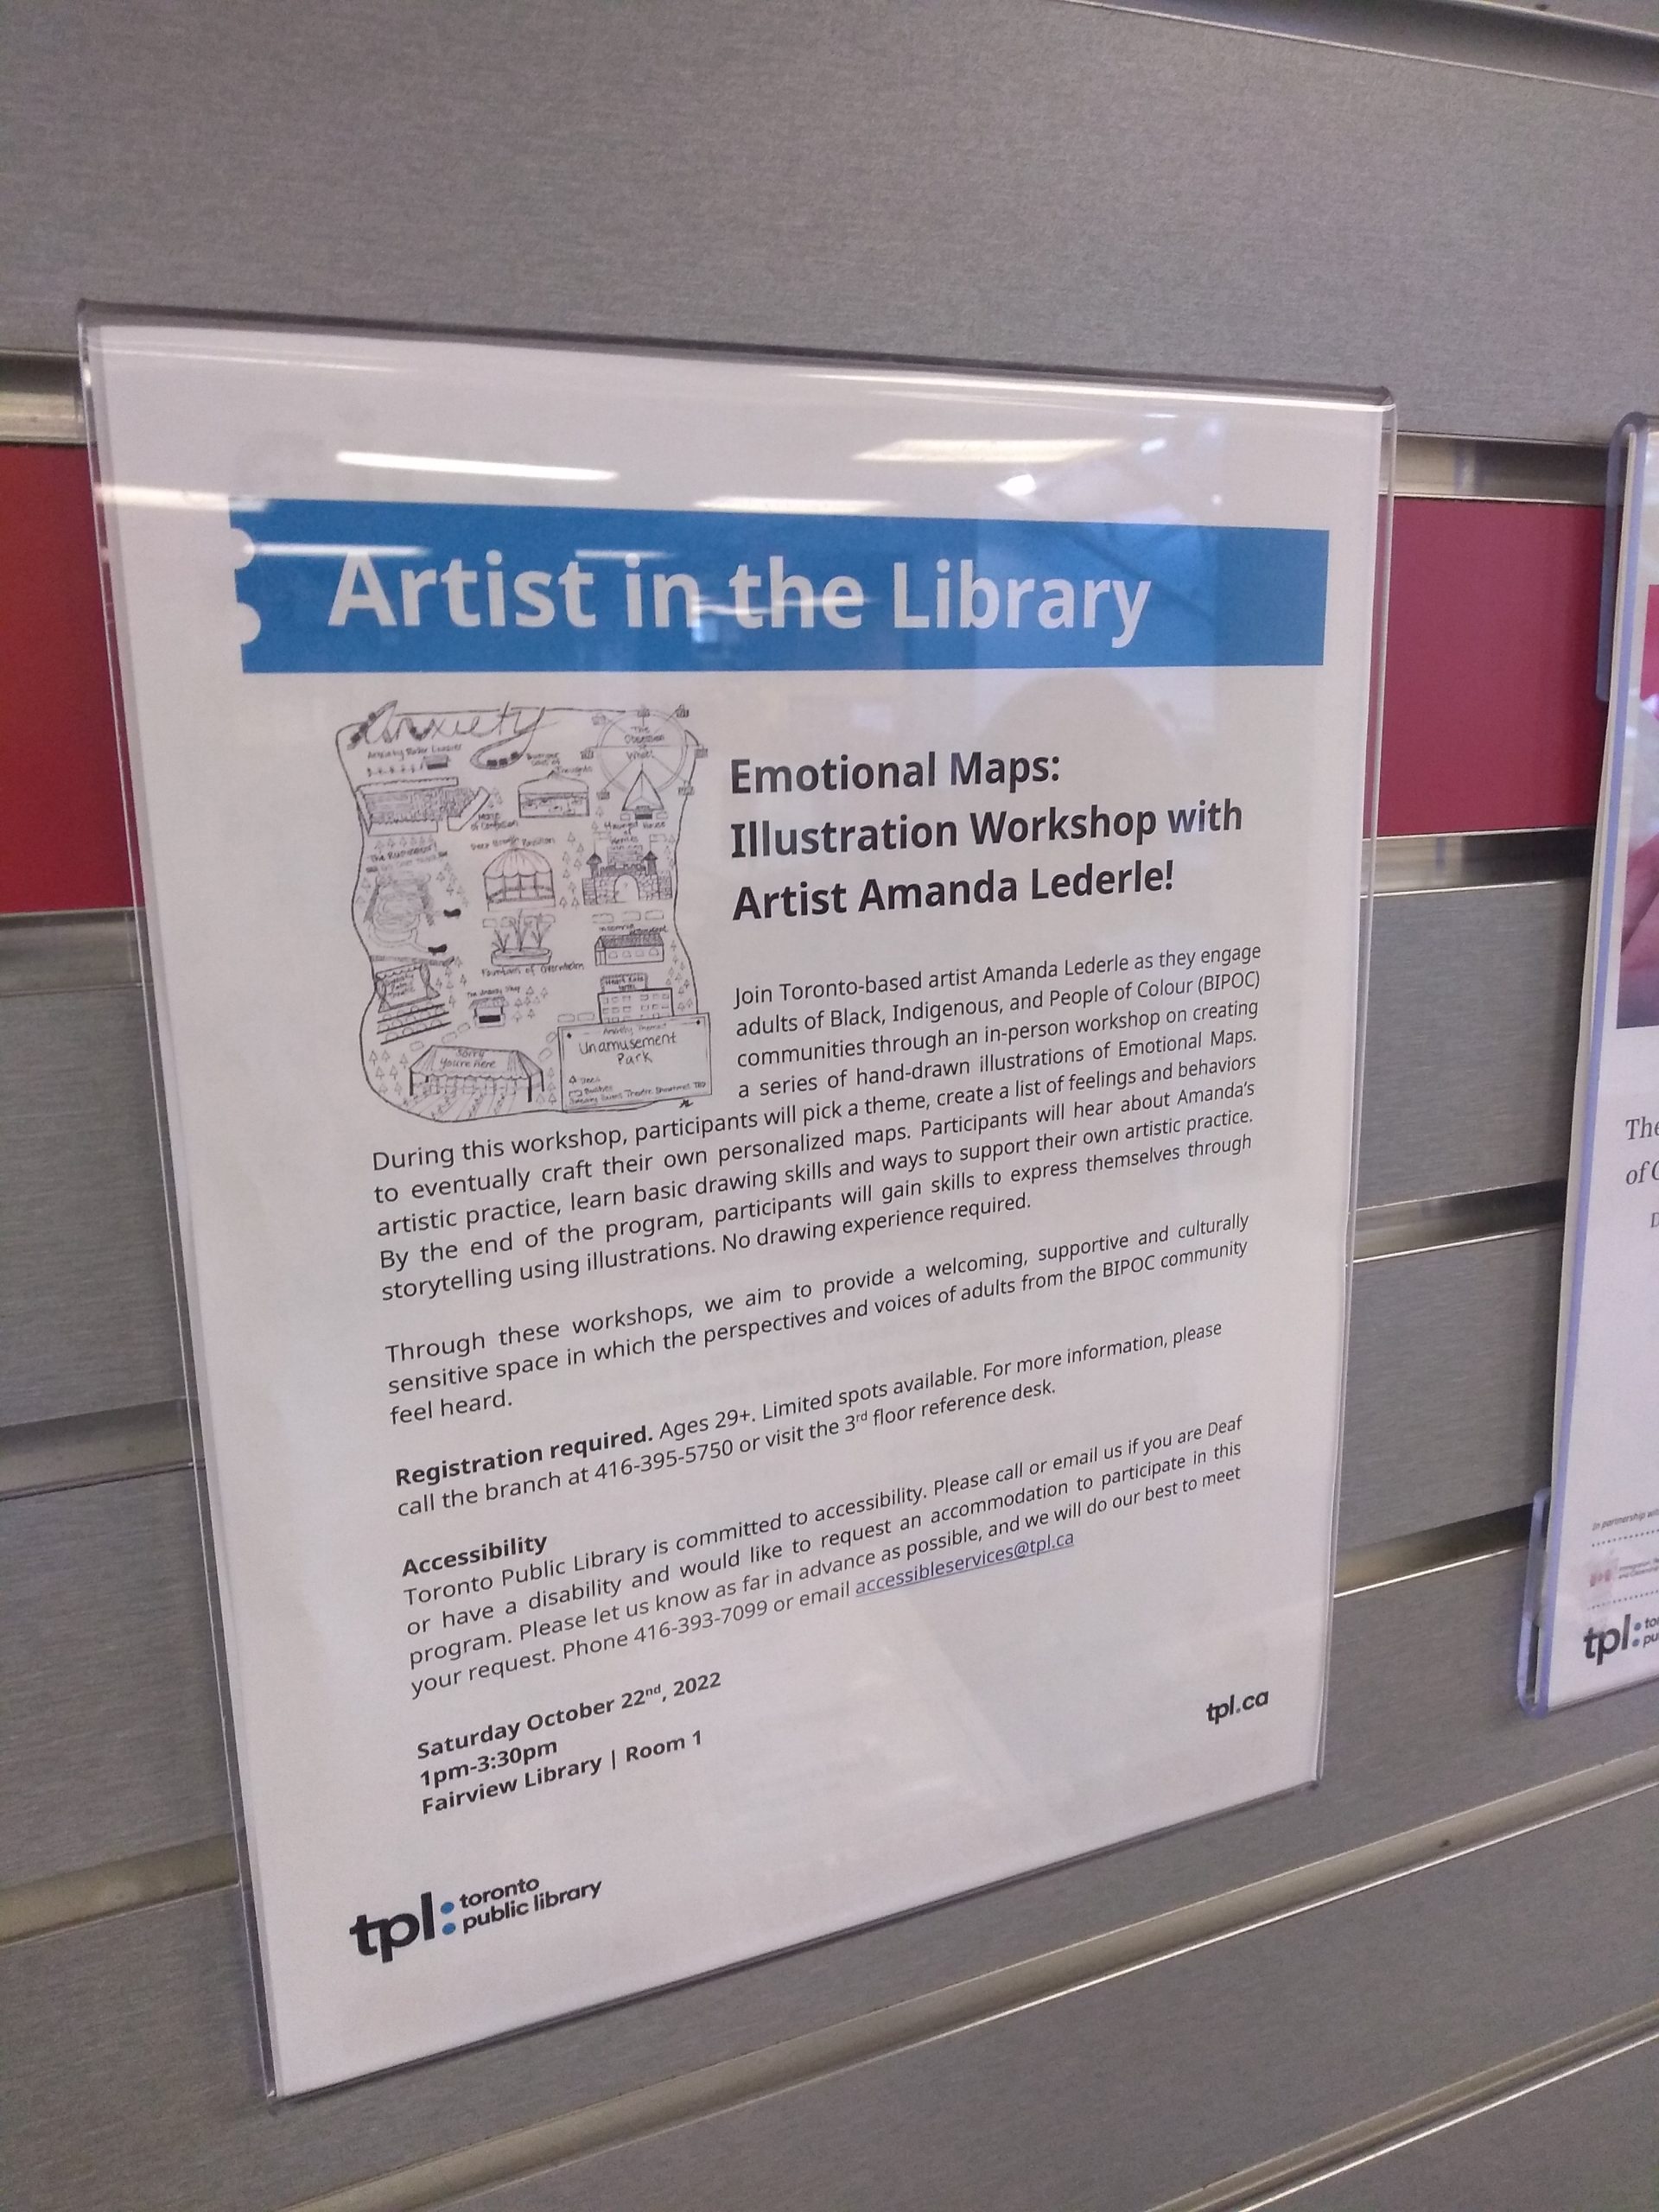 A photo of the Artist in the Library poster in a plexi glass mounted on a wall.